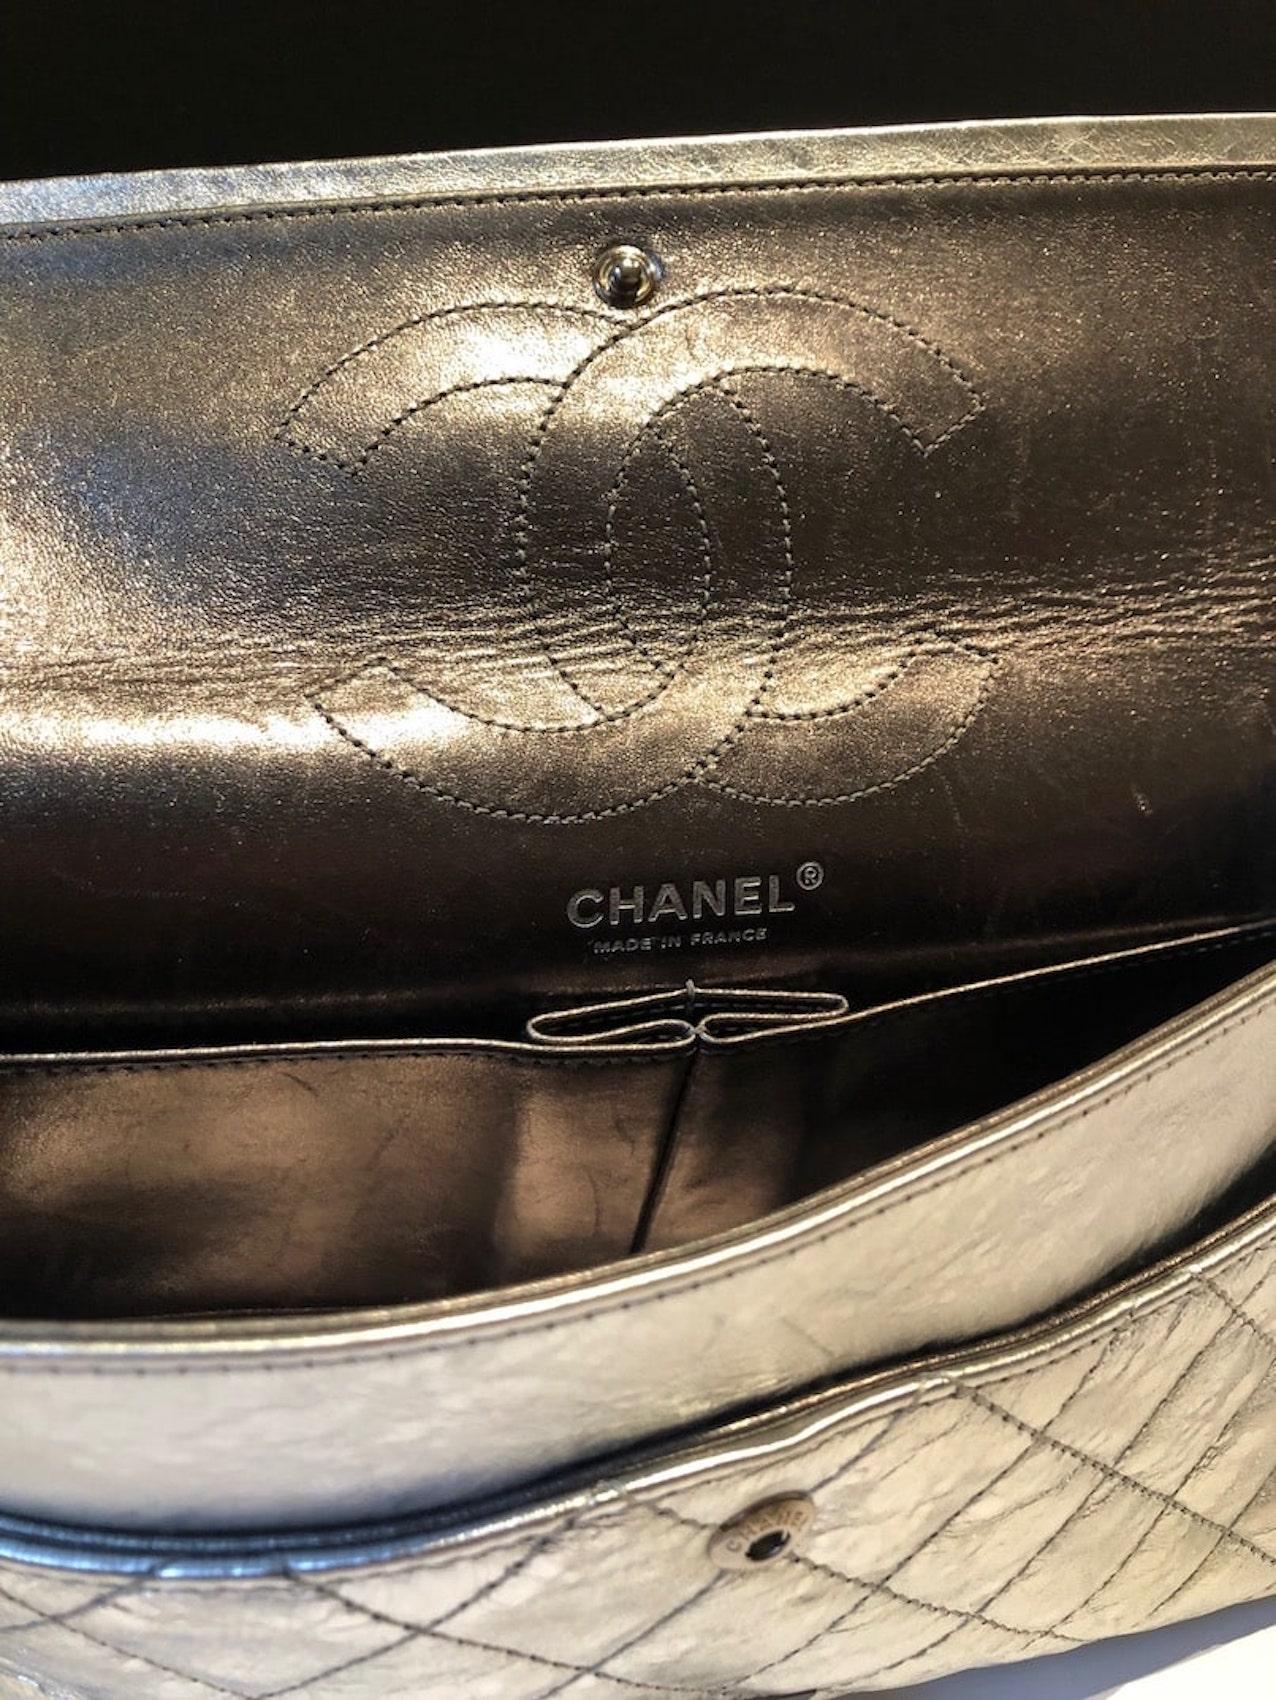 CHANEL Metallic Silver Quilted 2.55 Aged Leather Reissue Double Flap Bag 228  For Sale 1